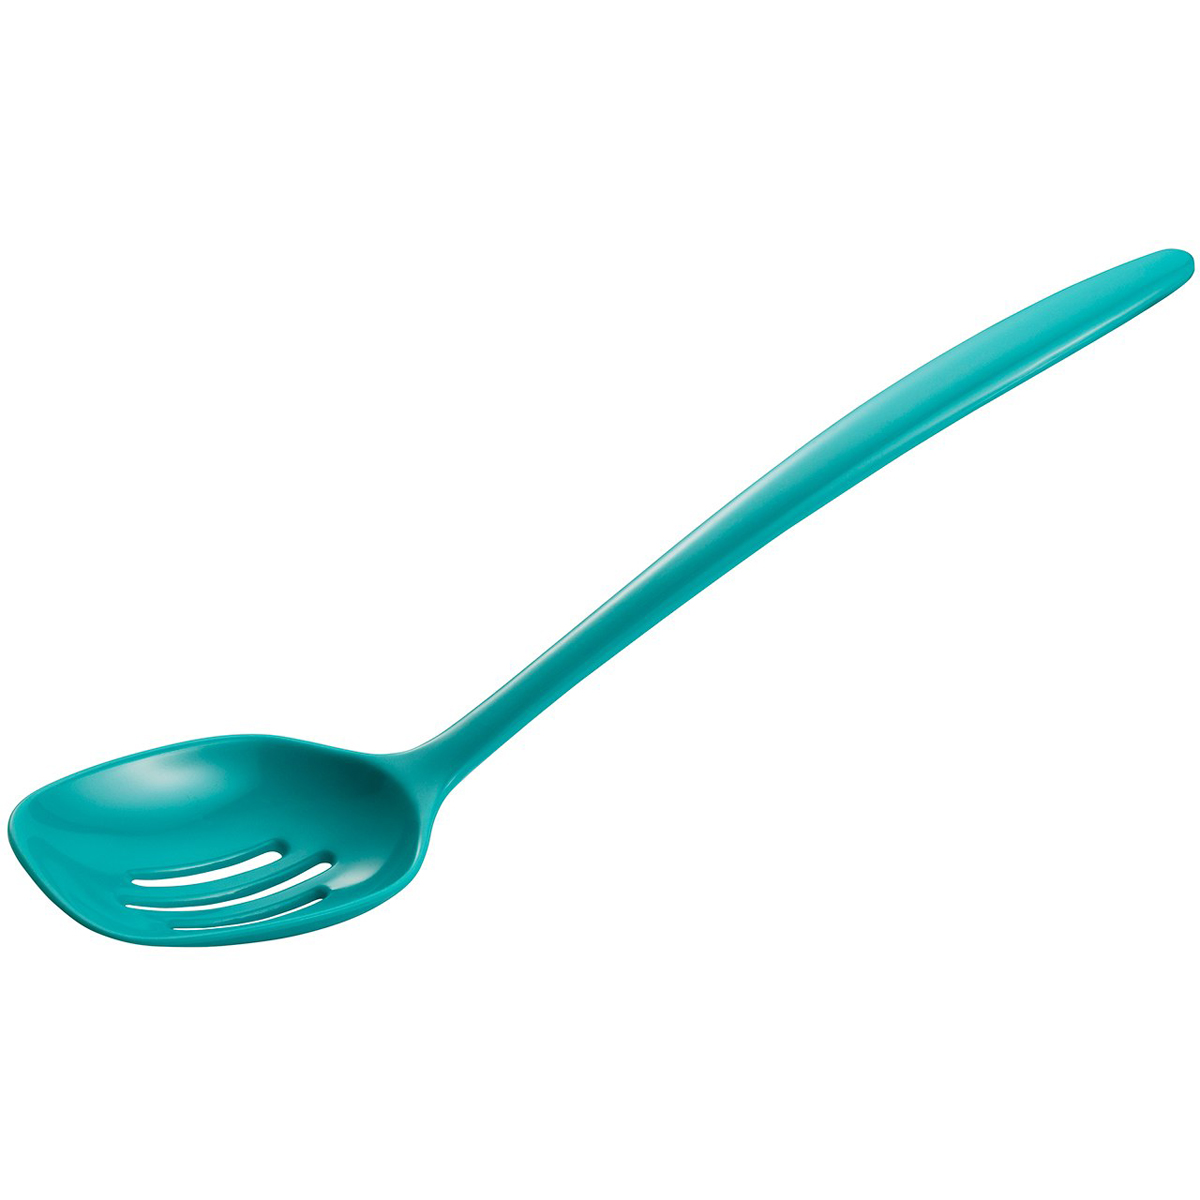 Gourmac G532TU Turquoise Melamine Slotted Spoon, 12" Long